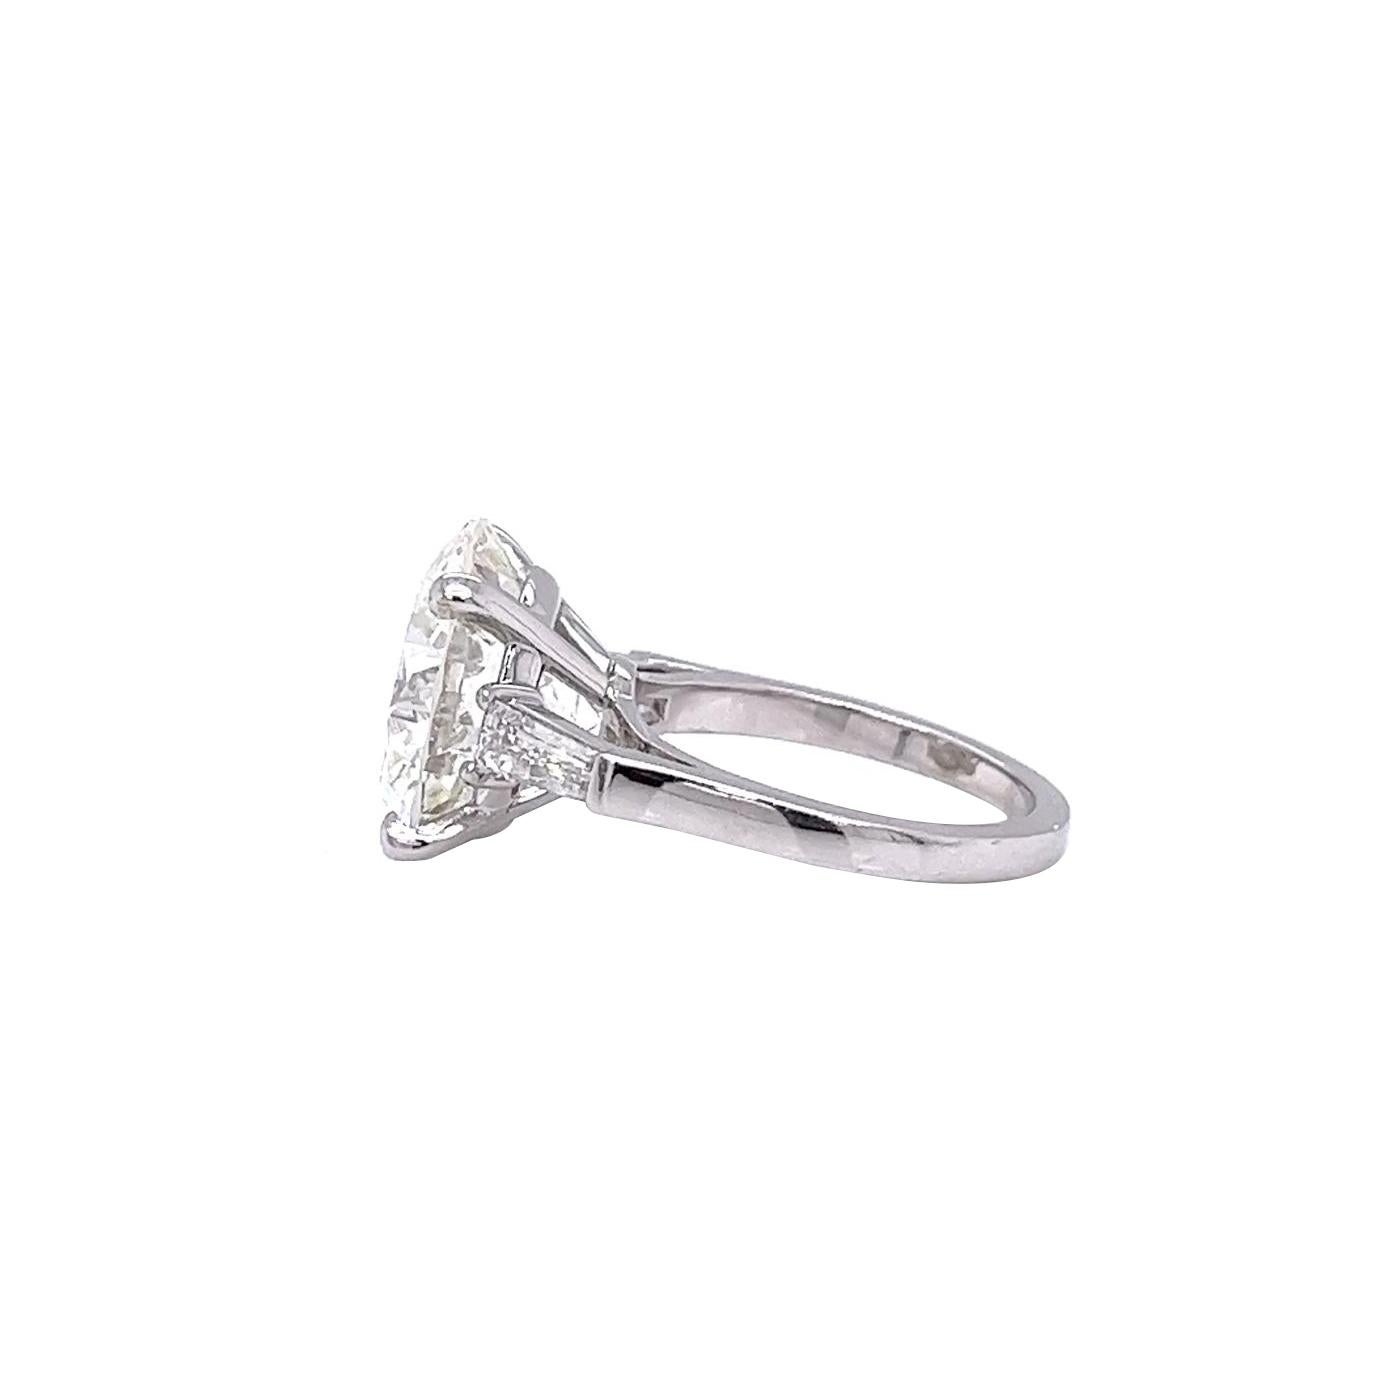 GIA 10.01ct Natural Round Cut Diamond Engagement Ring in Platinum VS2 Clarity In Good Condition For Sale In Aventura, FL